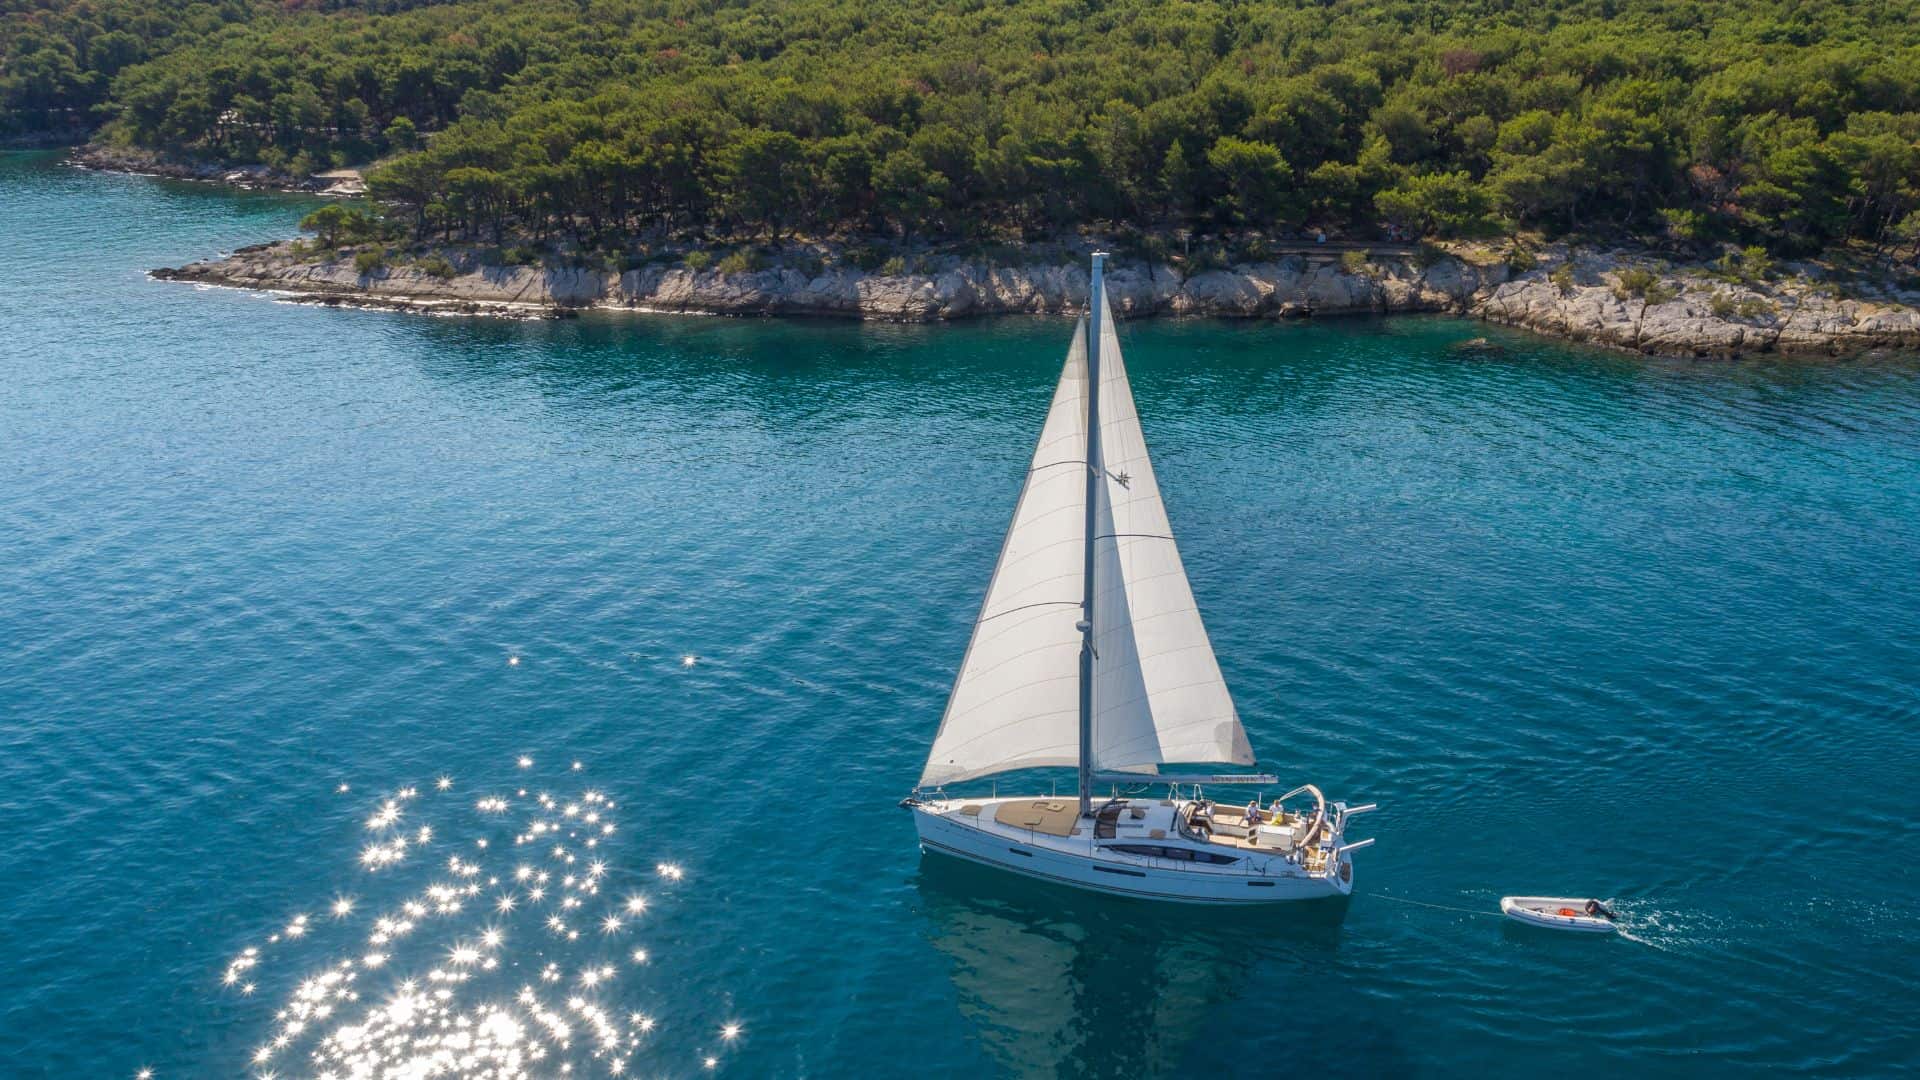 Who Should try a sailing holiday in Croatia?